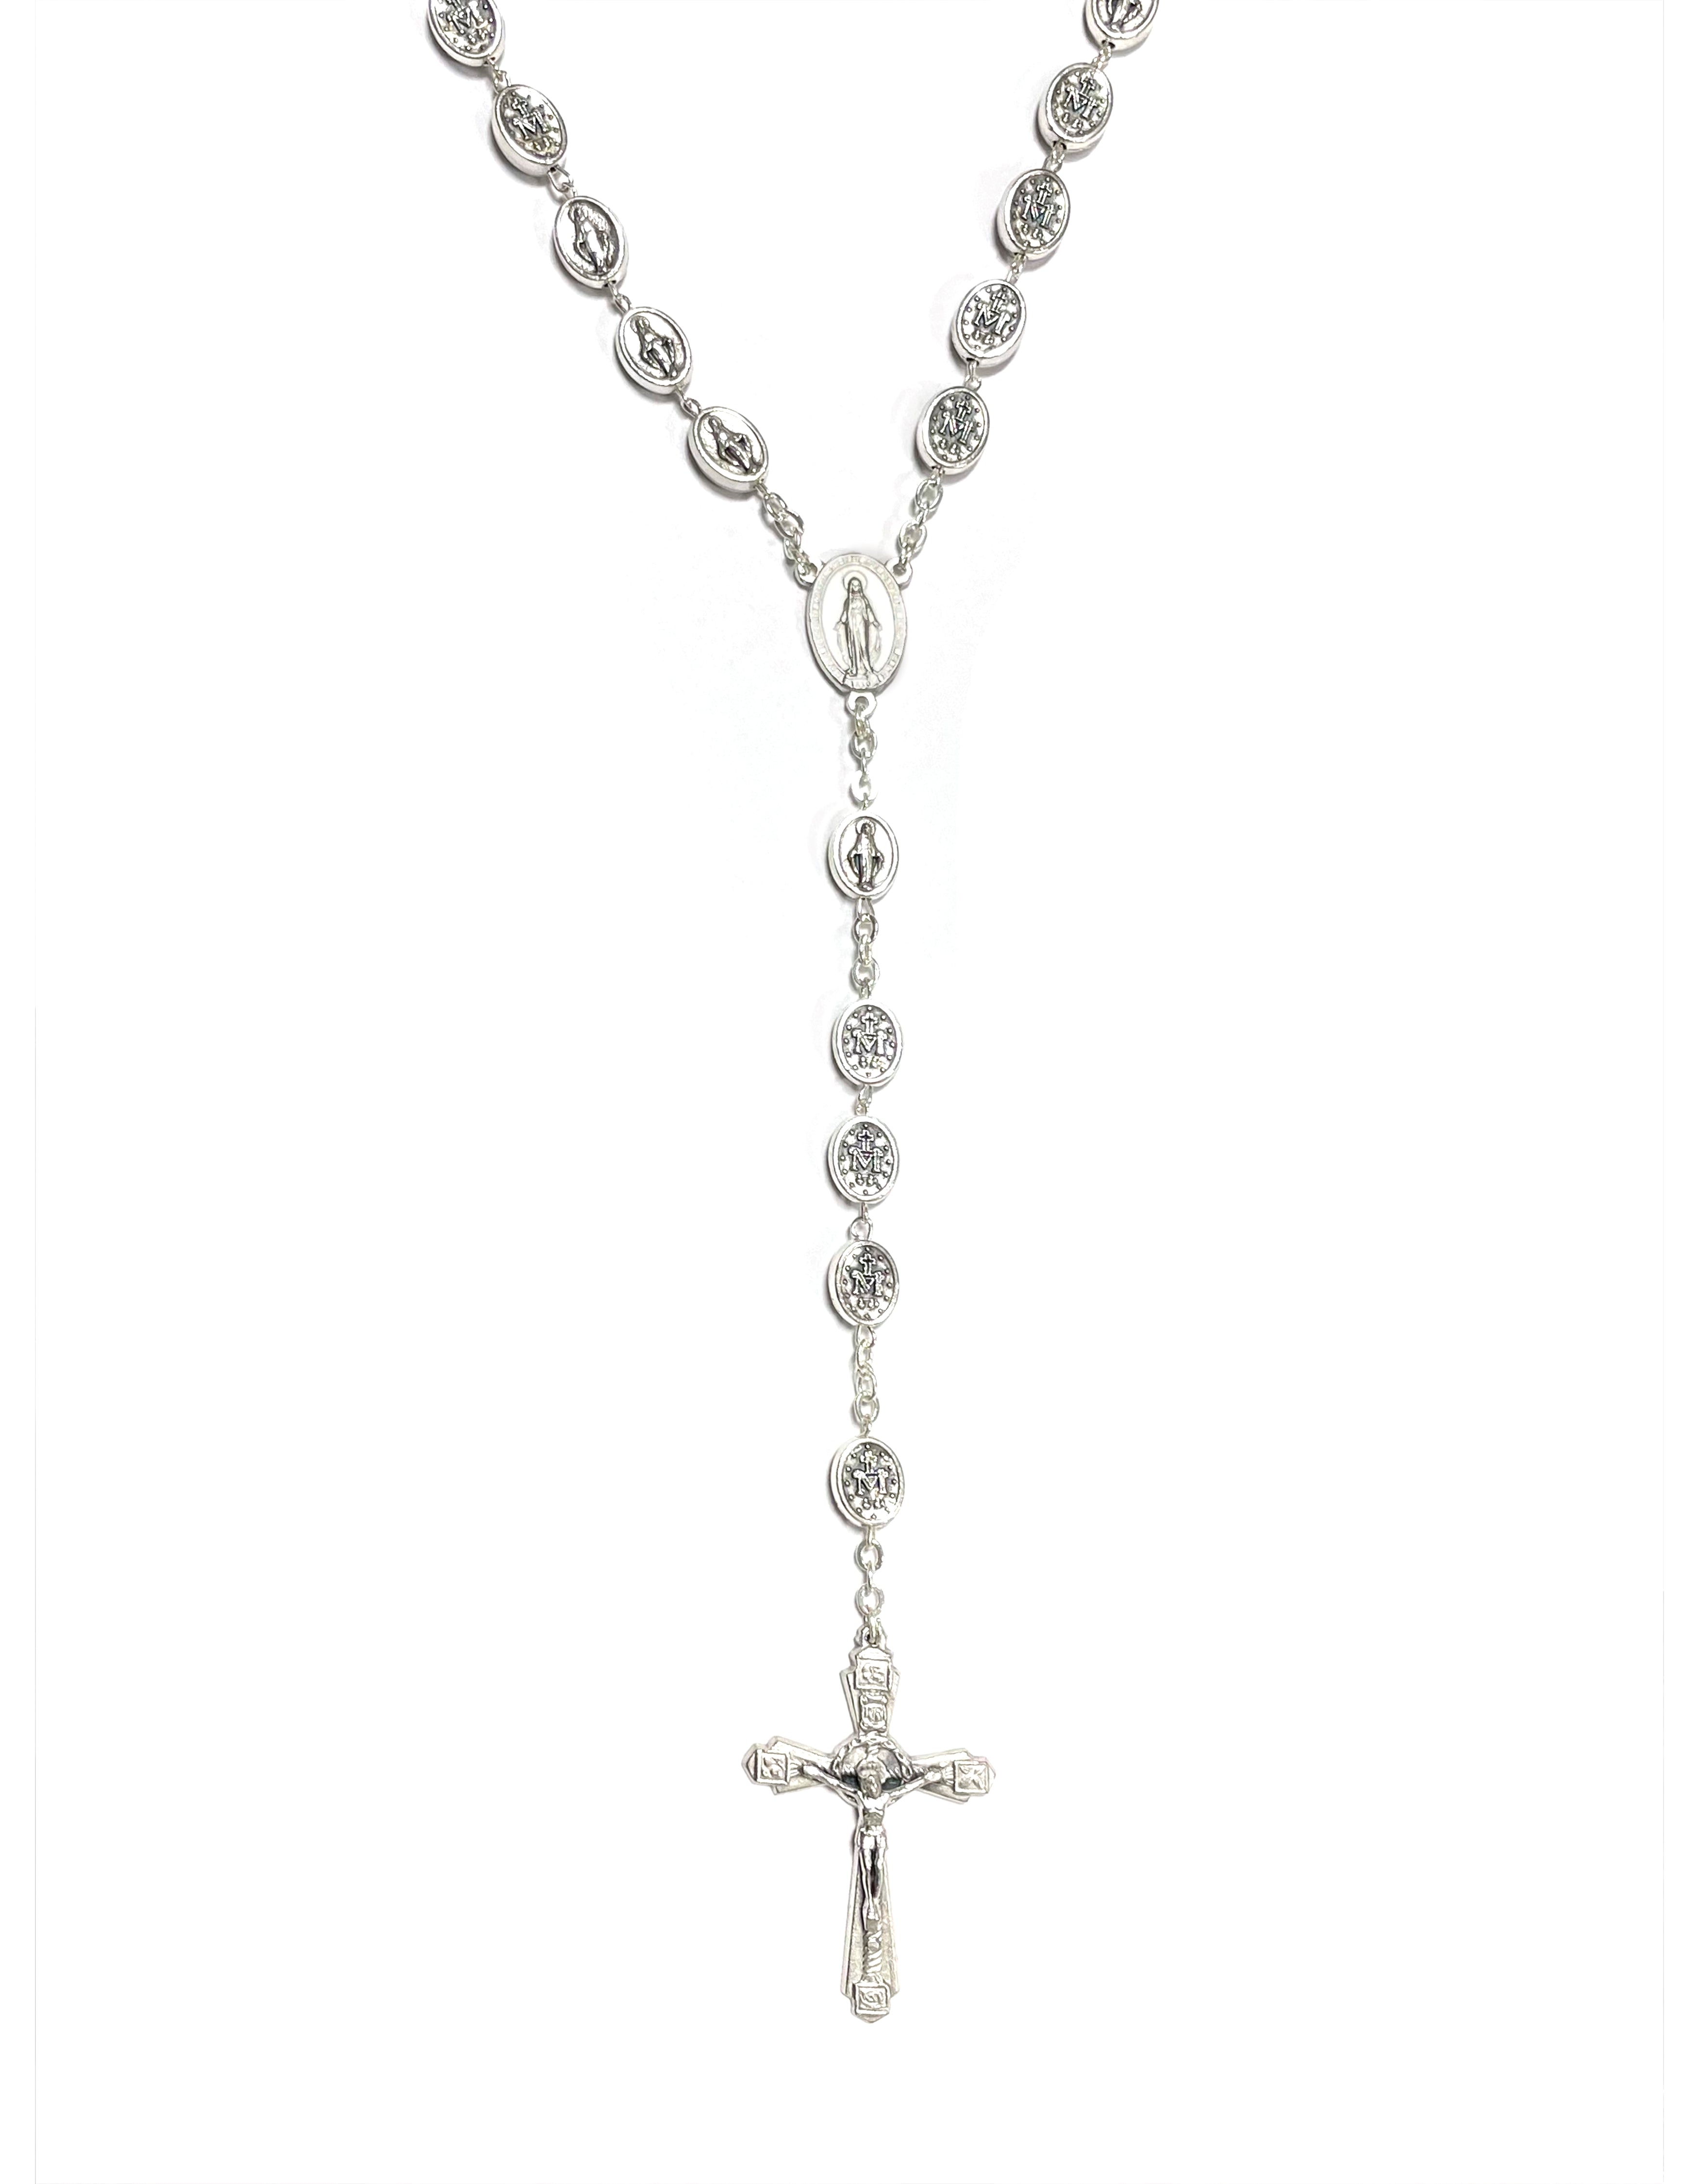 Rosary with Miraculous medals beads